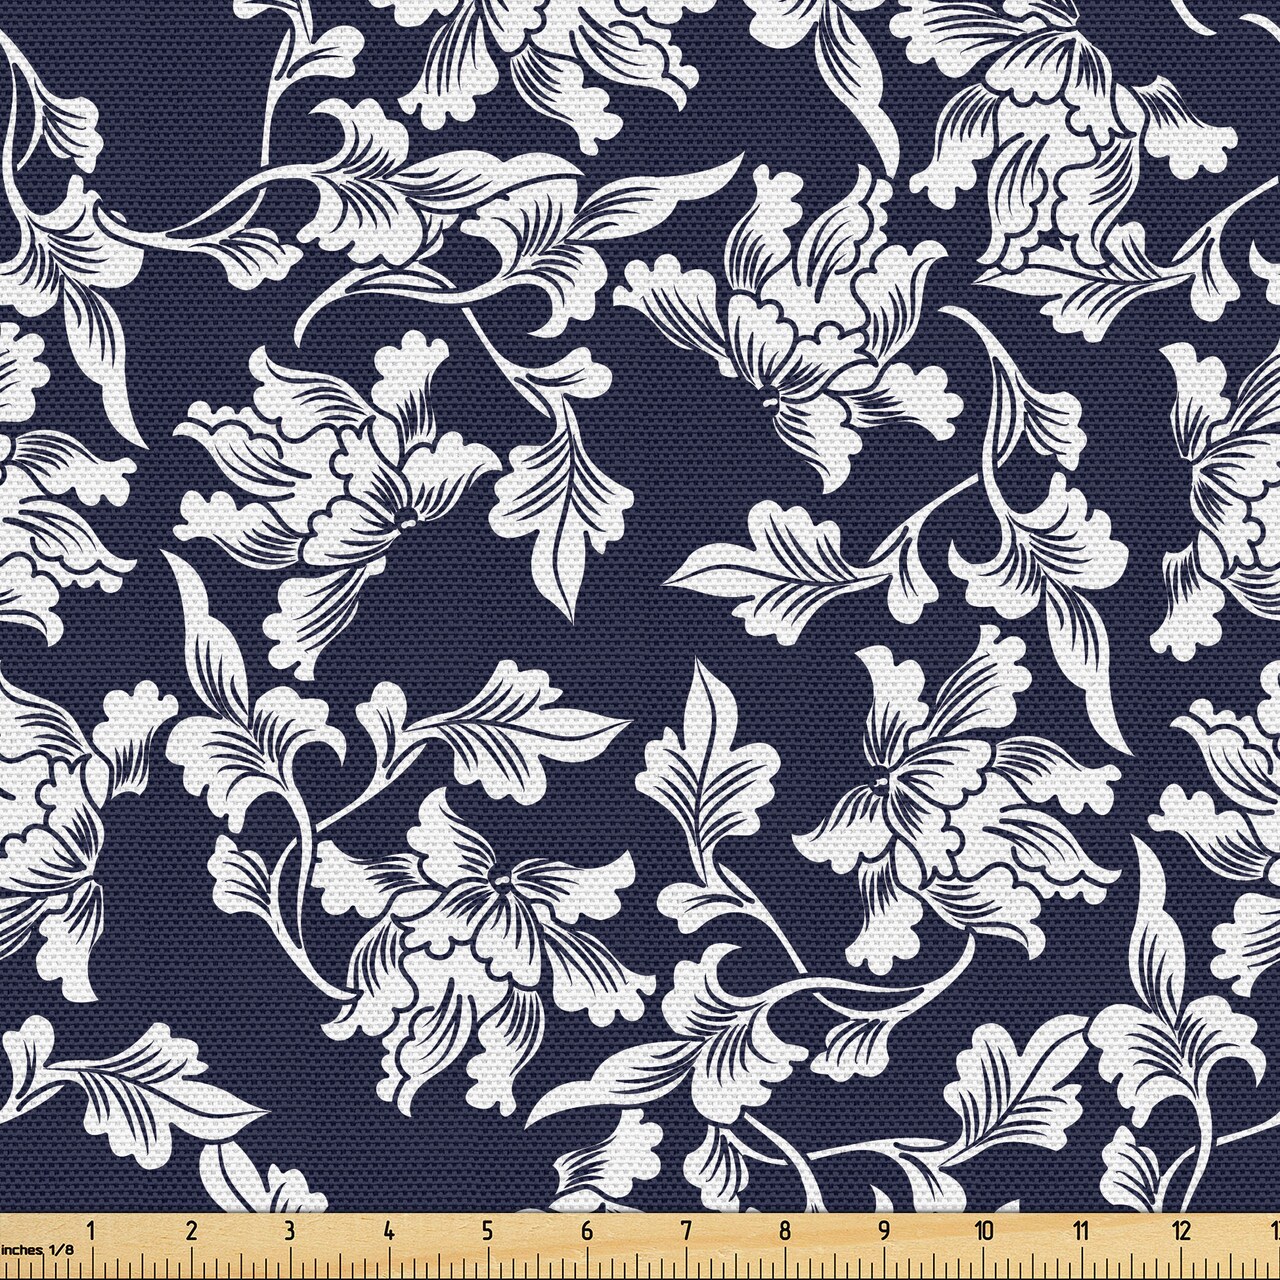 Ambesonne Navy Blue Fabric by The Yard Floral Arrangement Botanic Foliage Pattern Japanese Composition Eastern Decorative Fabric for Headboard Upholstery Table Runner Seat Cushion 2 Yards Blue White